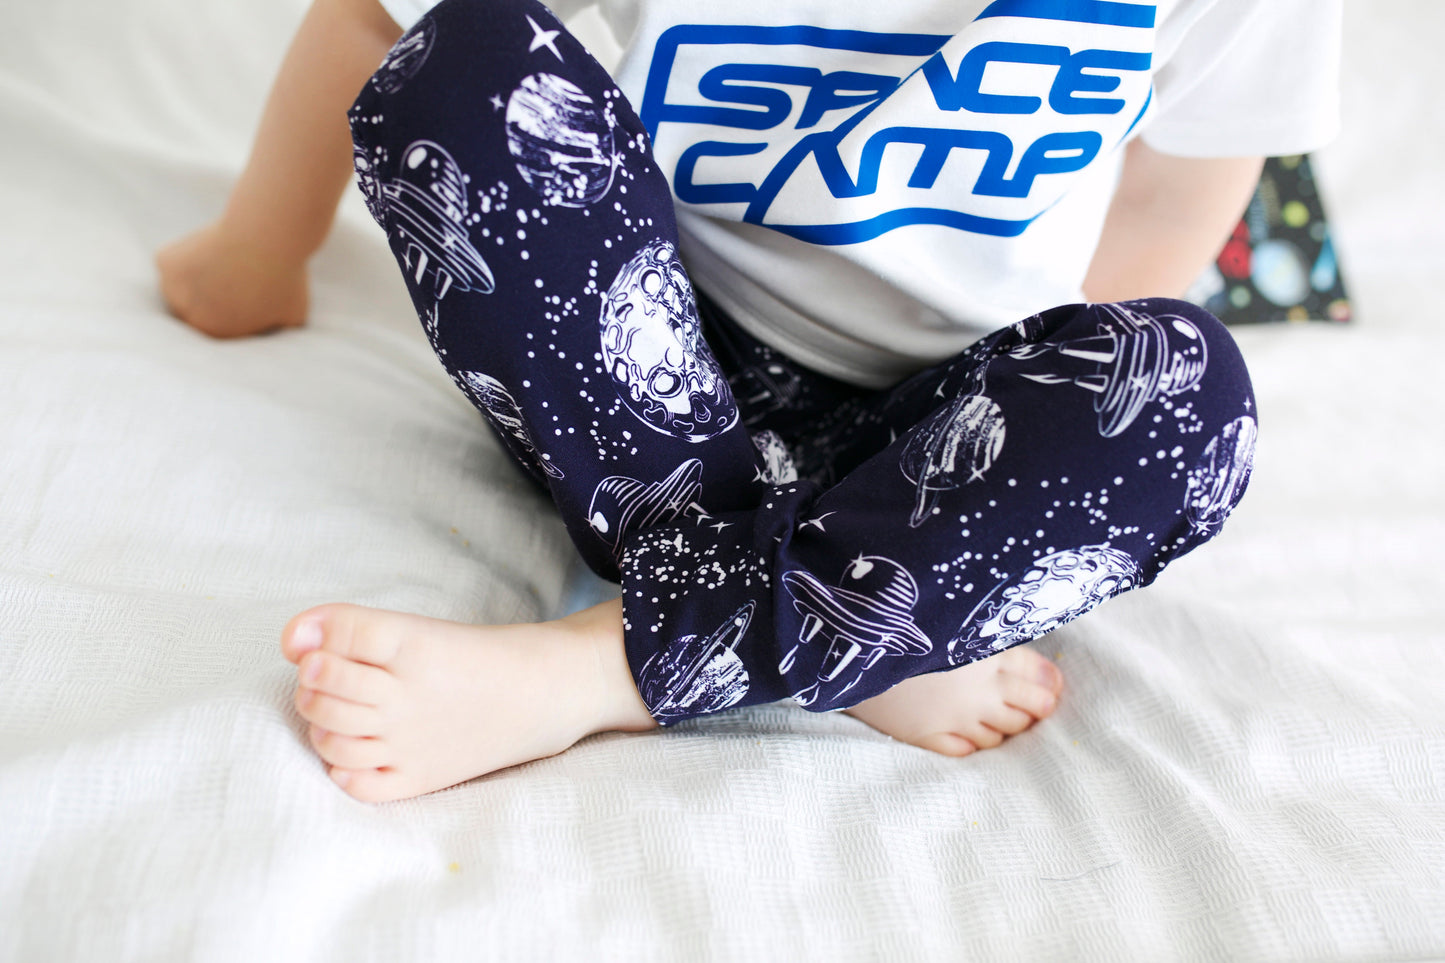 Load image into Gallery viewer, Blue Space Leggings
